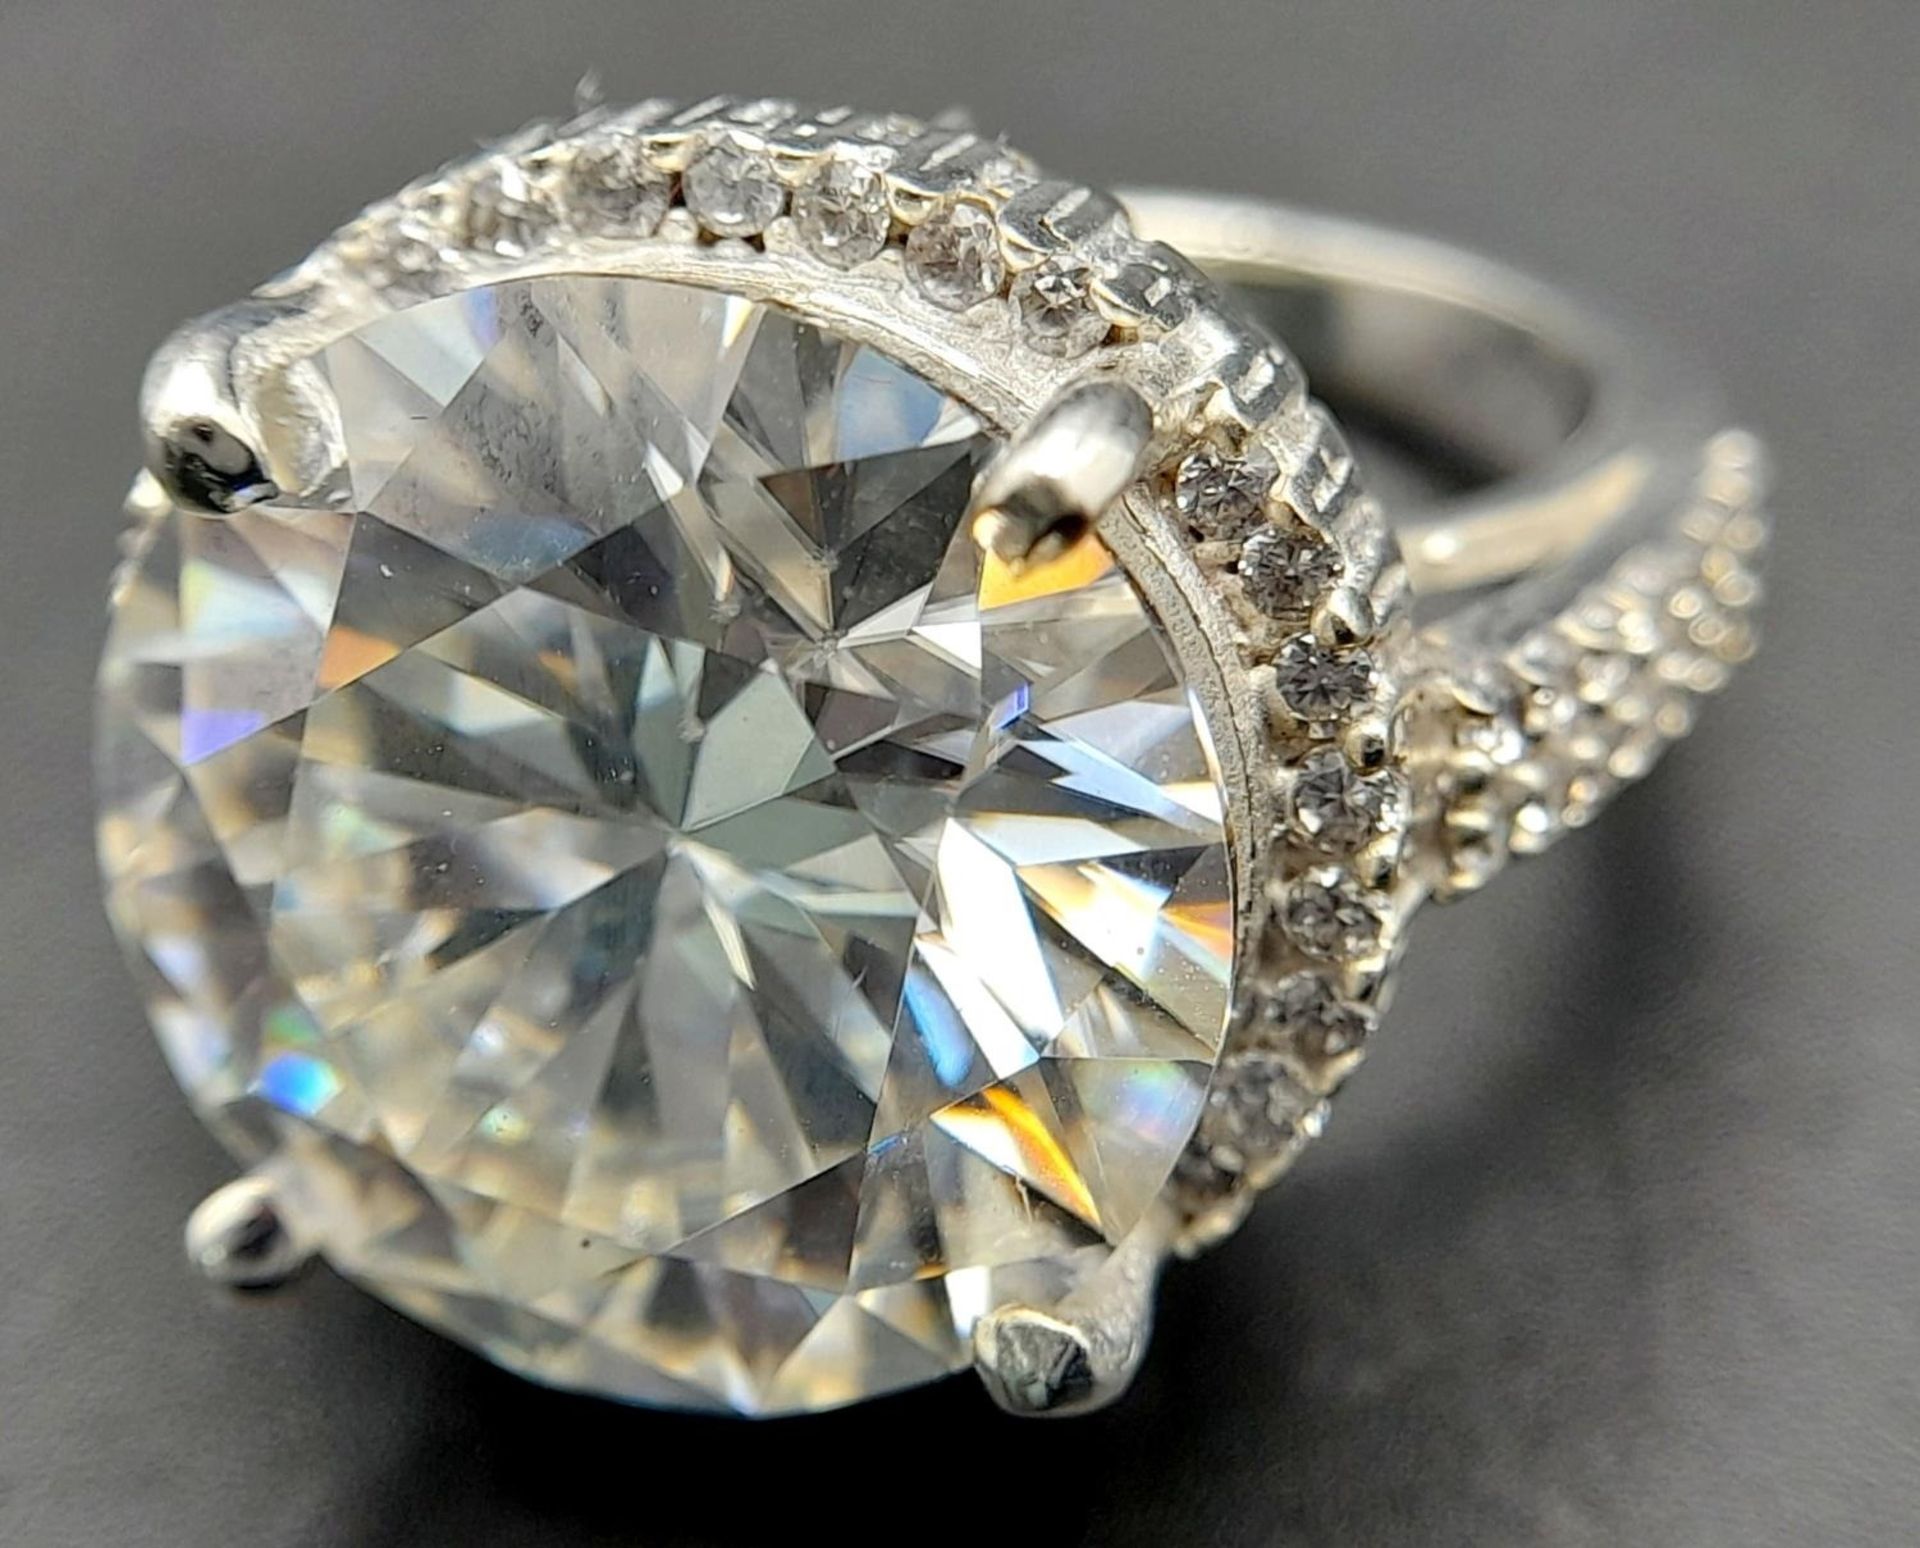 An 11.40ct White Moissanite Statement Dress Ring. Set in 925 Silver. Size O. 8g total weight.